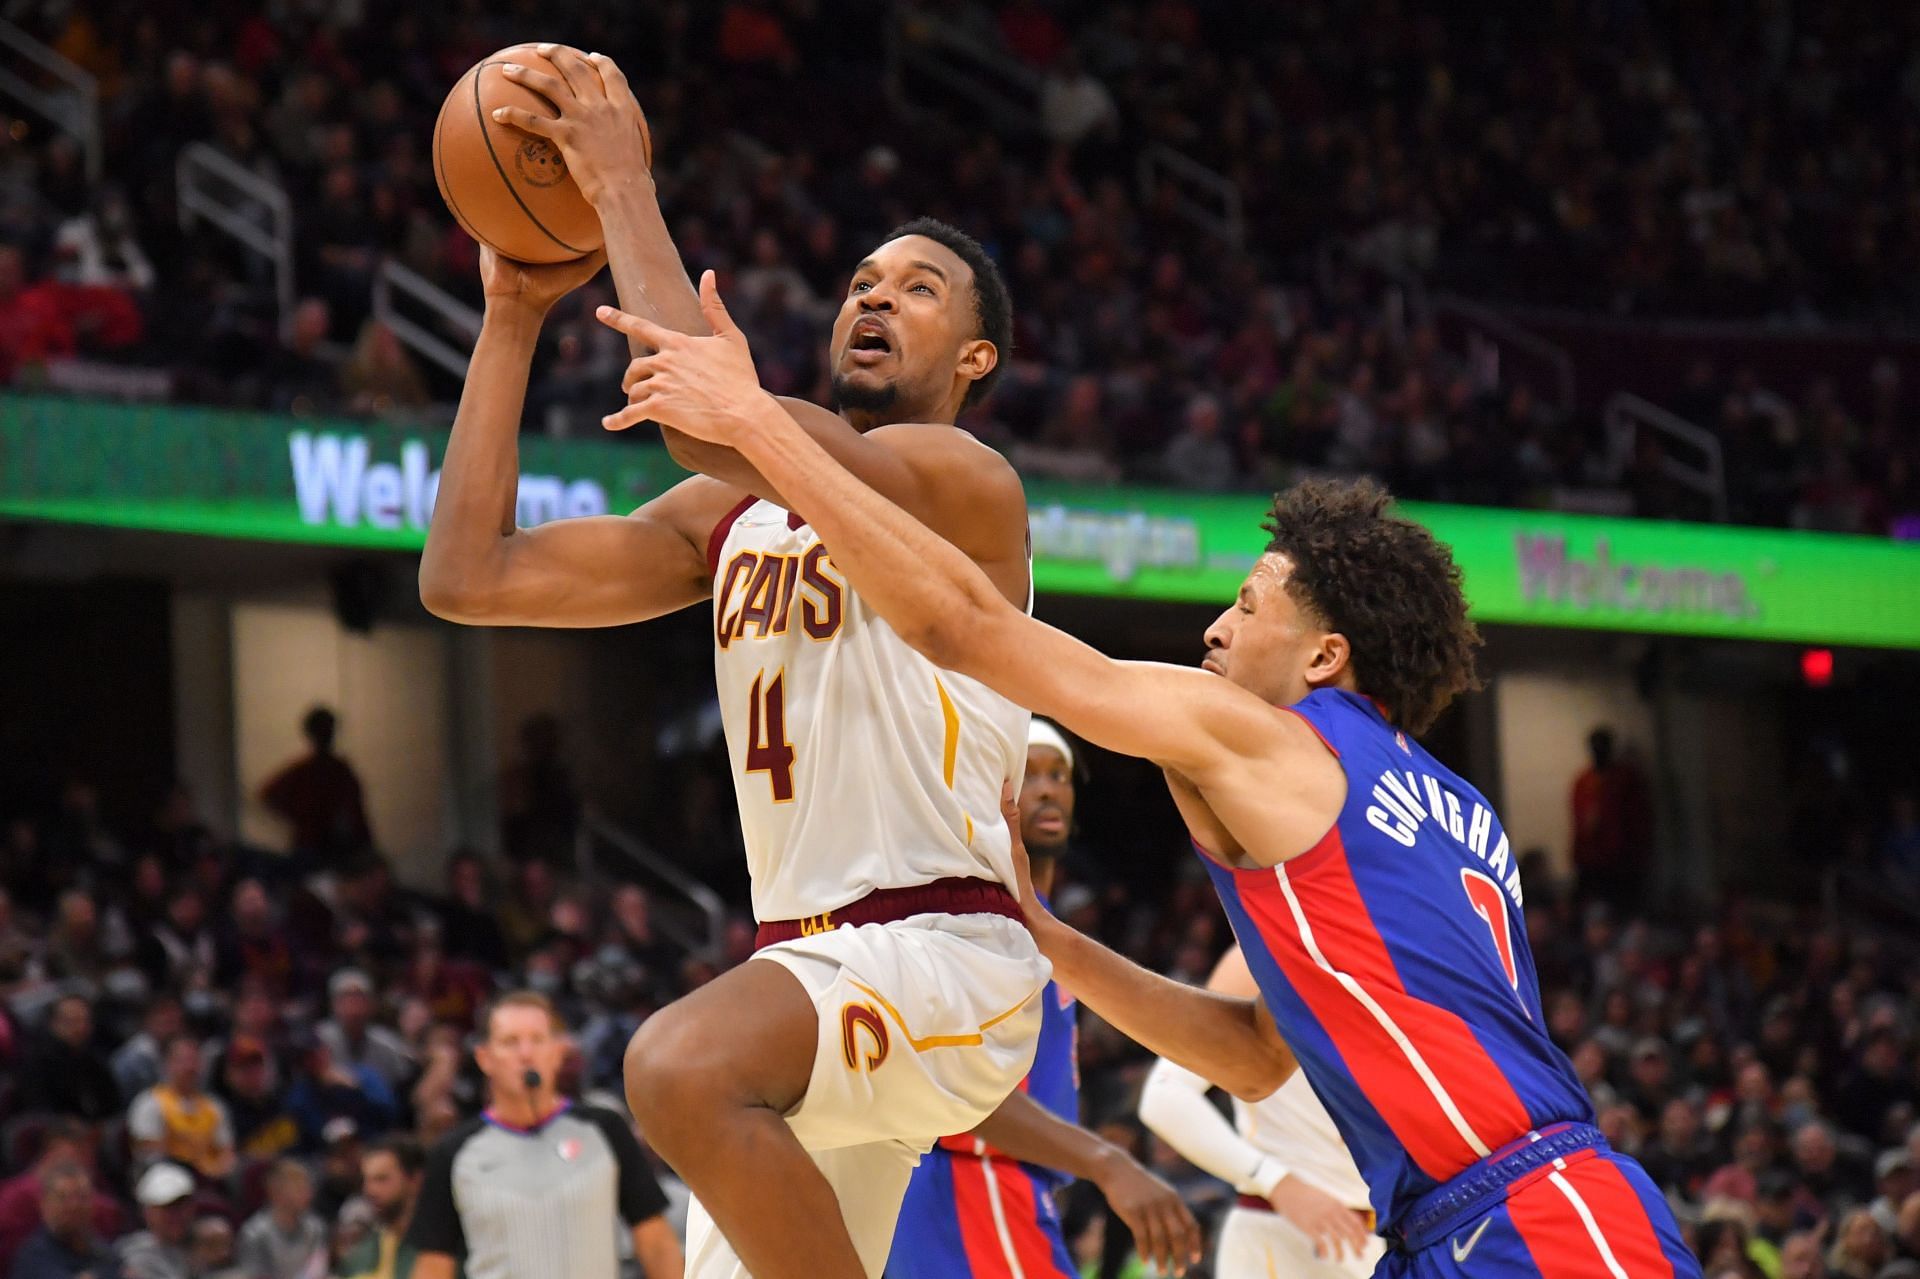 Evan Mobley of the Cleveland Cavaliers shoots over Cade Cunningham of the Detroit Pistons on Nov. 12, 2021, in Cleveland, Ohio. The Cavaliers defeated the Pistons 98-78.